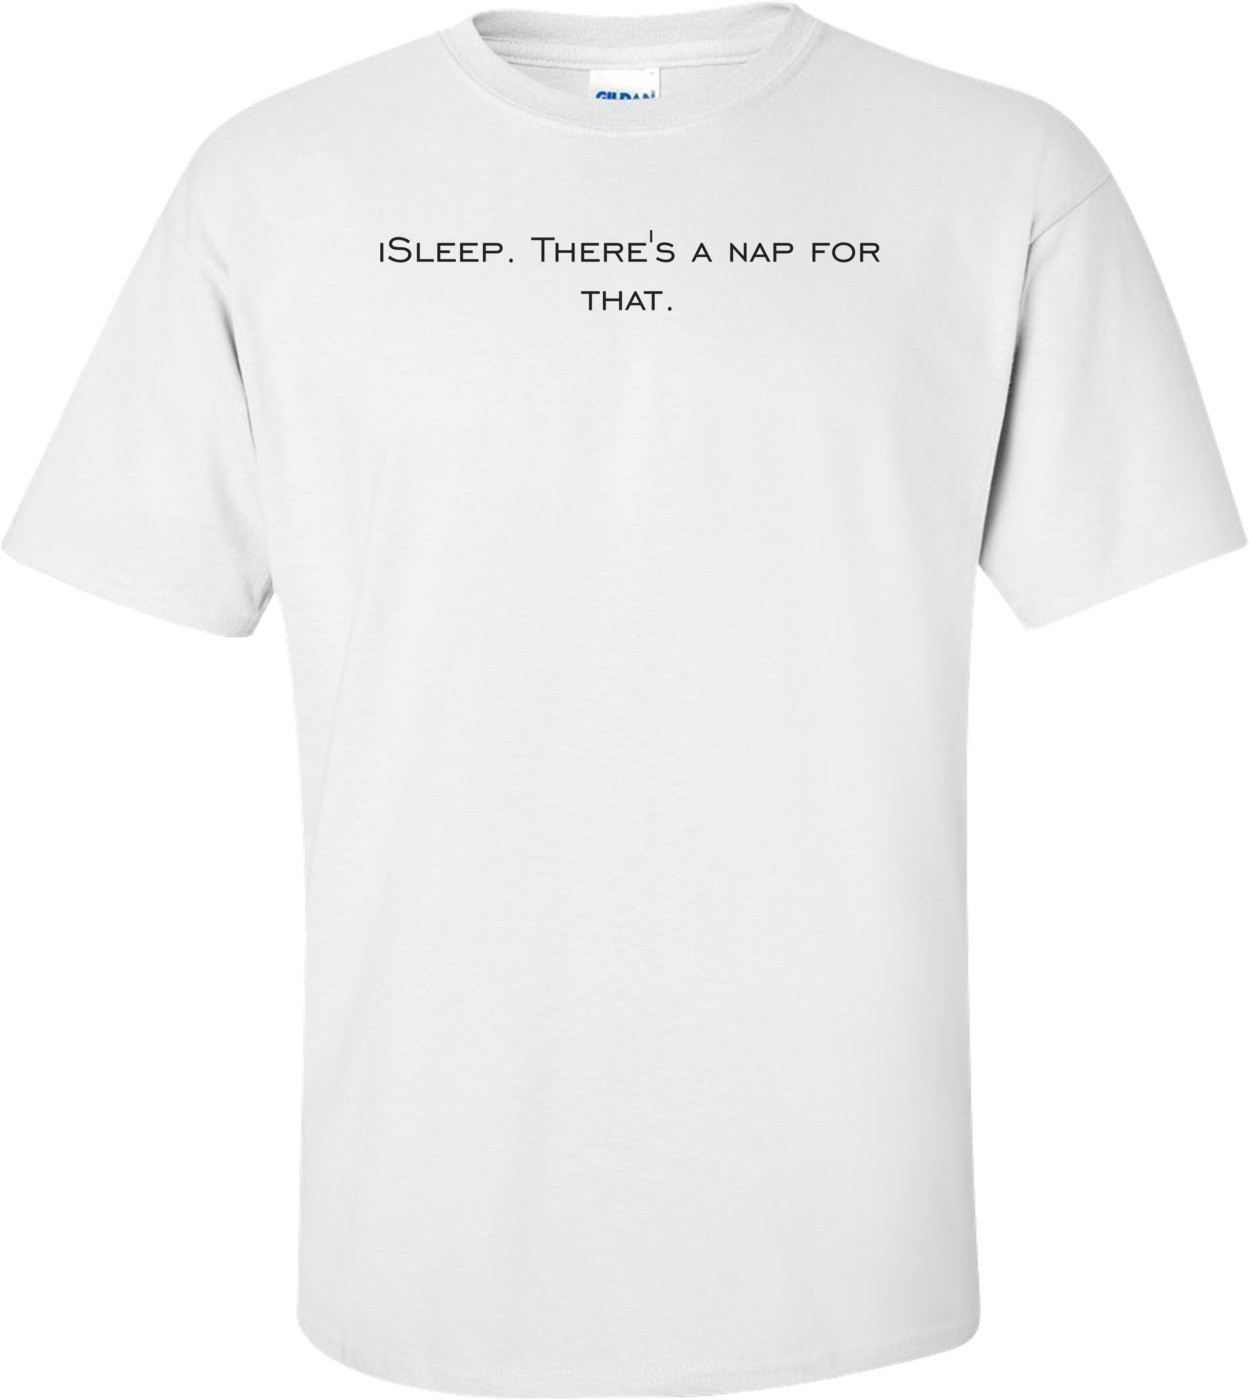 iSleep. There's a nap for that. Shirt